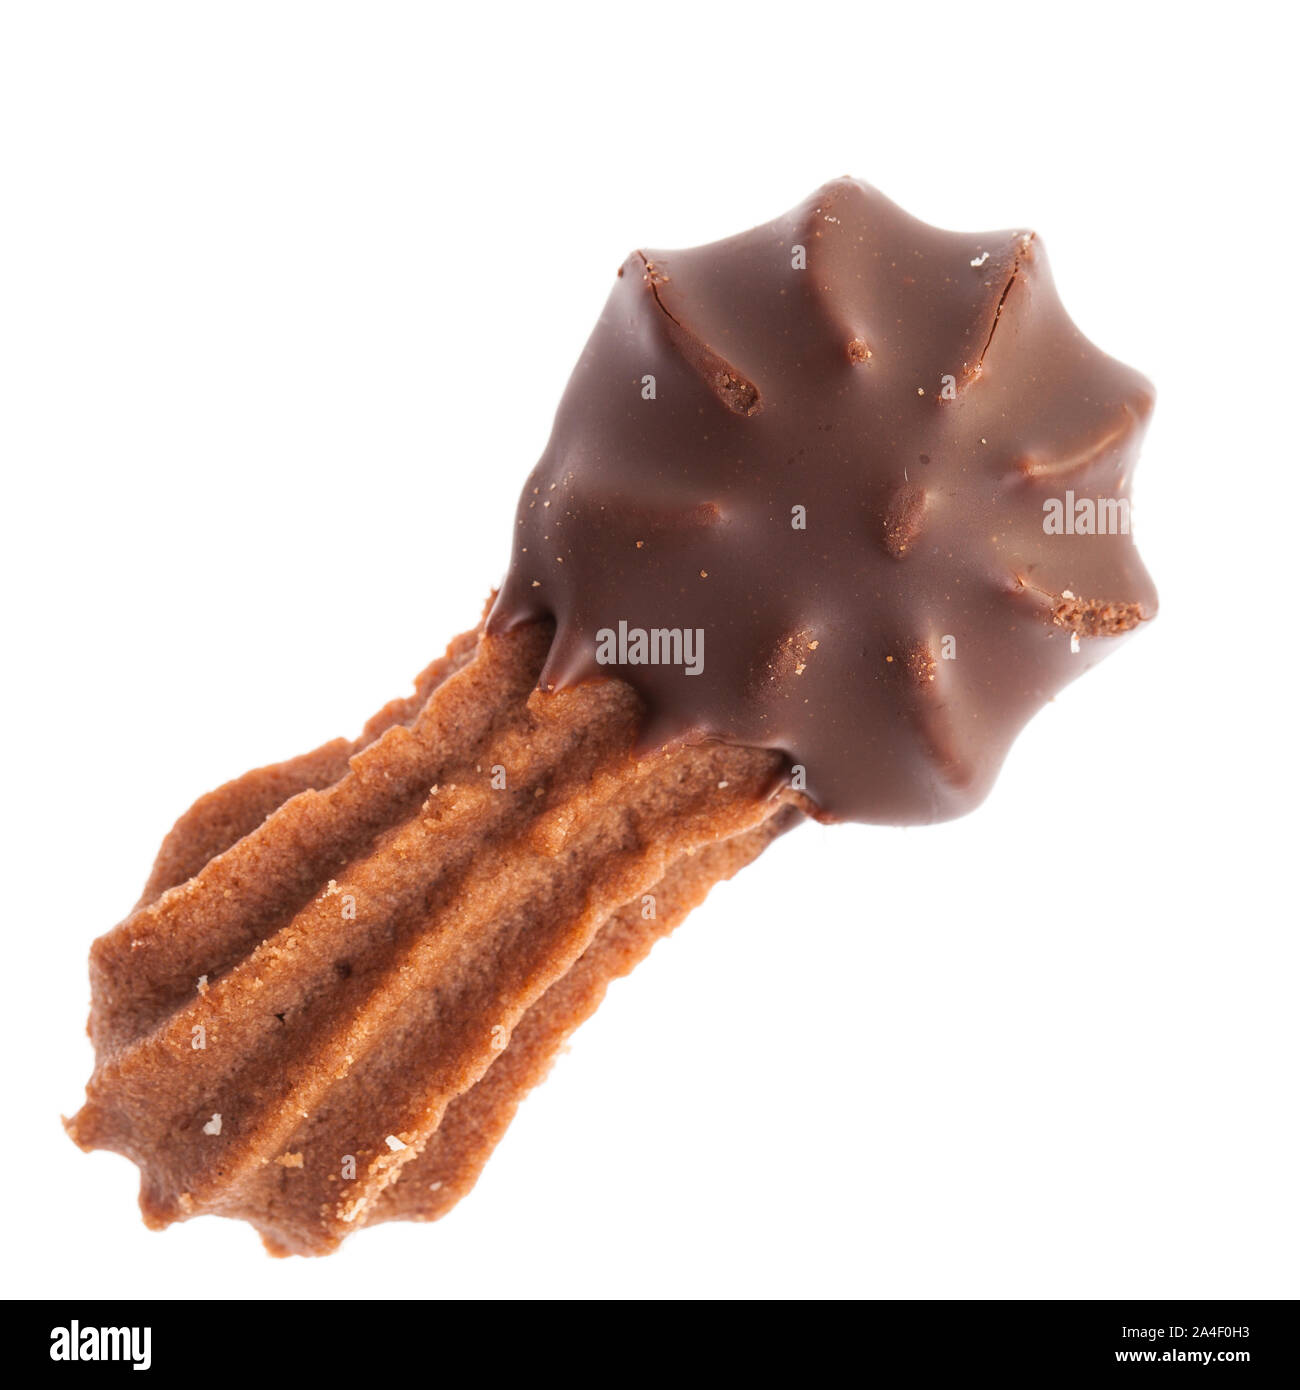 Christmas pastry:  Single dark cookie with chocolate on one end from above, isolated on white background Stock Photo